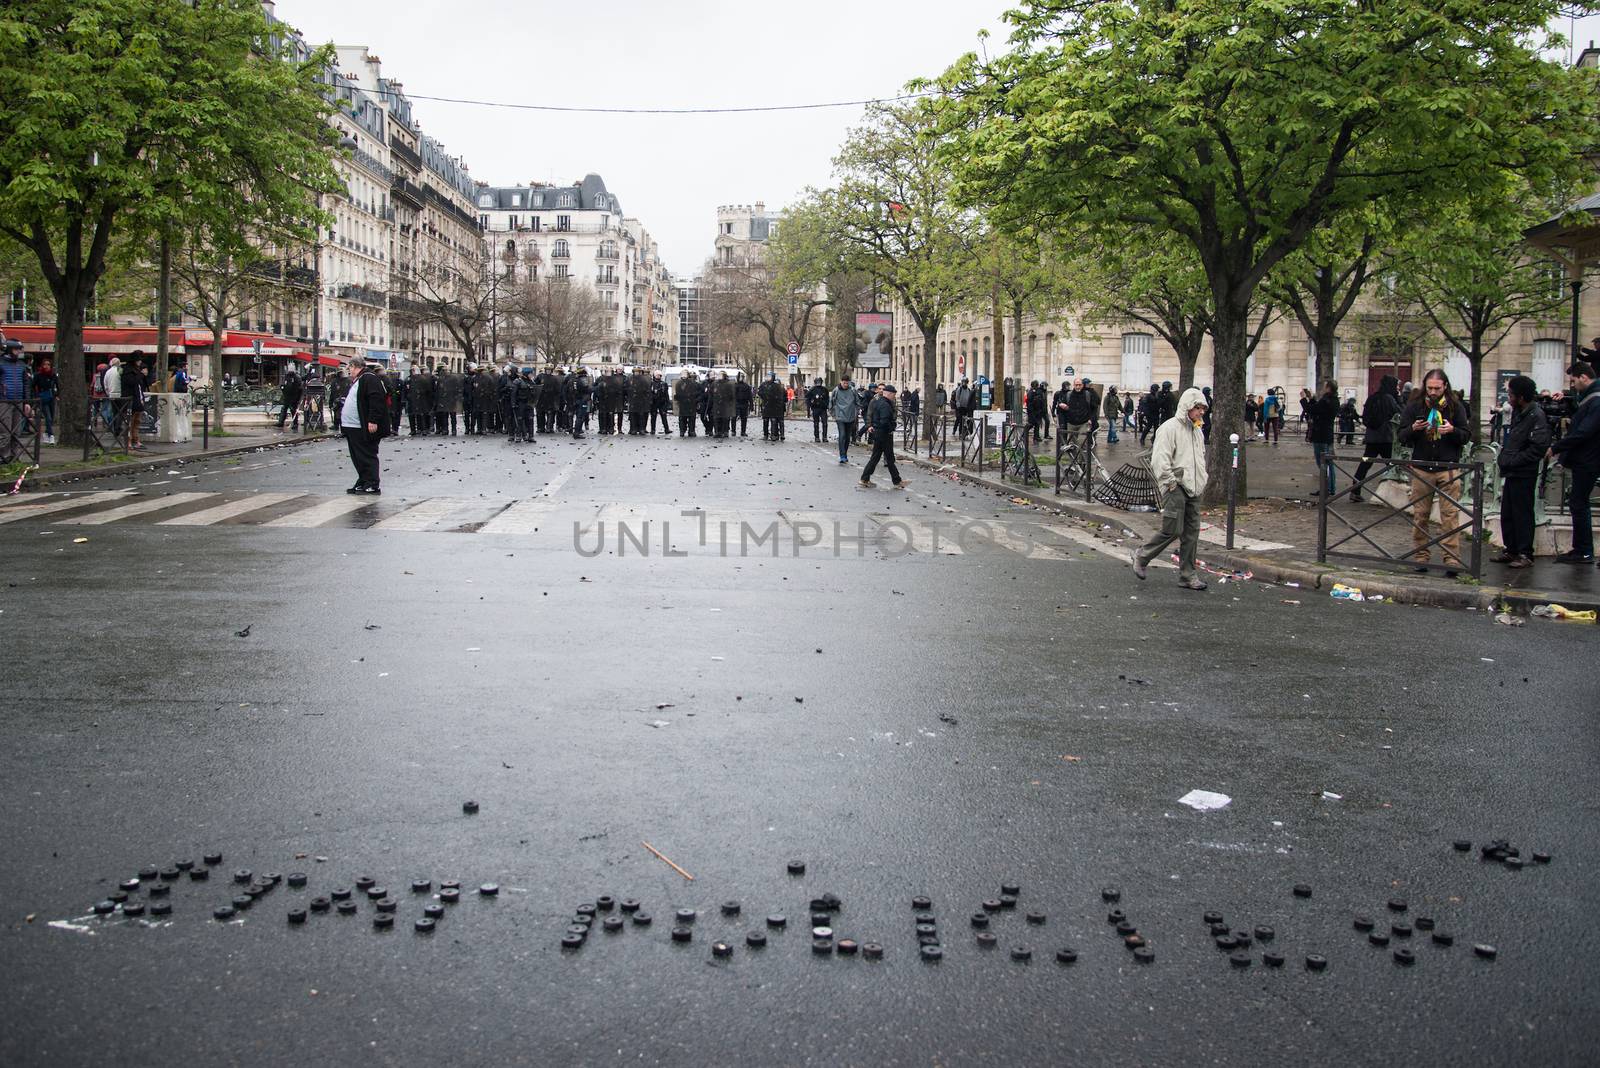 FRANCE, Paris: A picture shows a message written on the ground by protesters Etat policier (police state) during a demo on April 9, 2016 in Paris, against the French government's proposed labour law reforms.